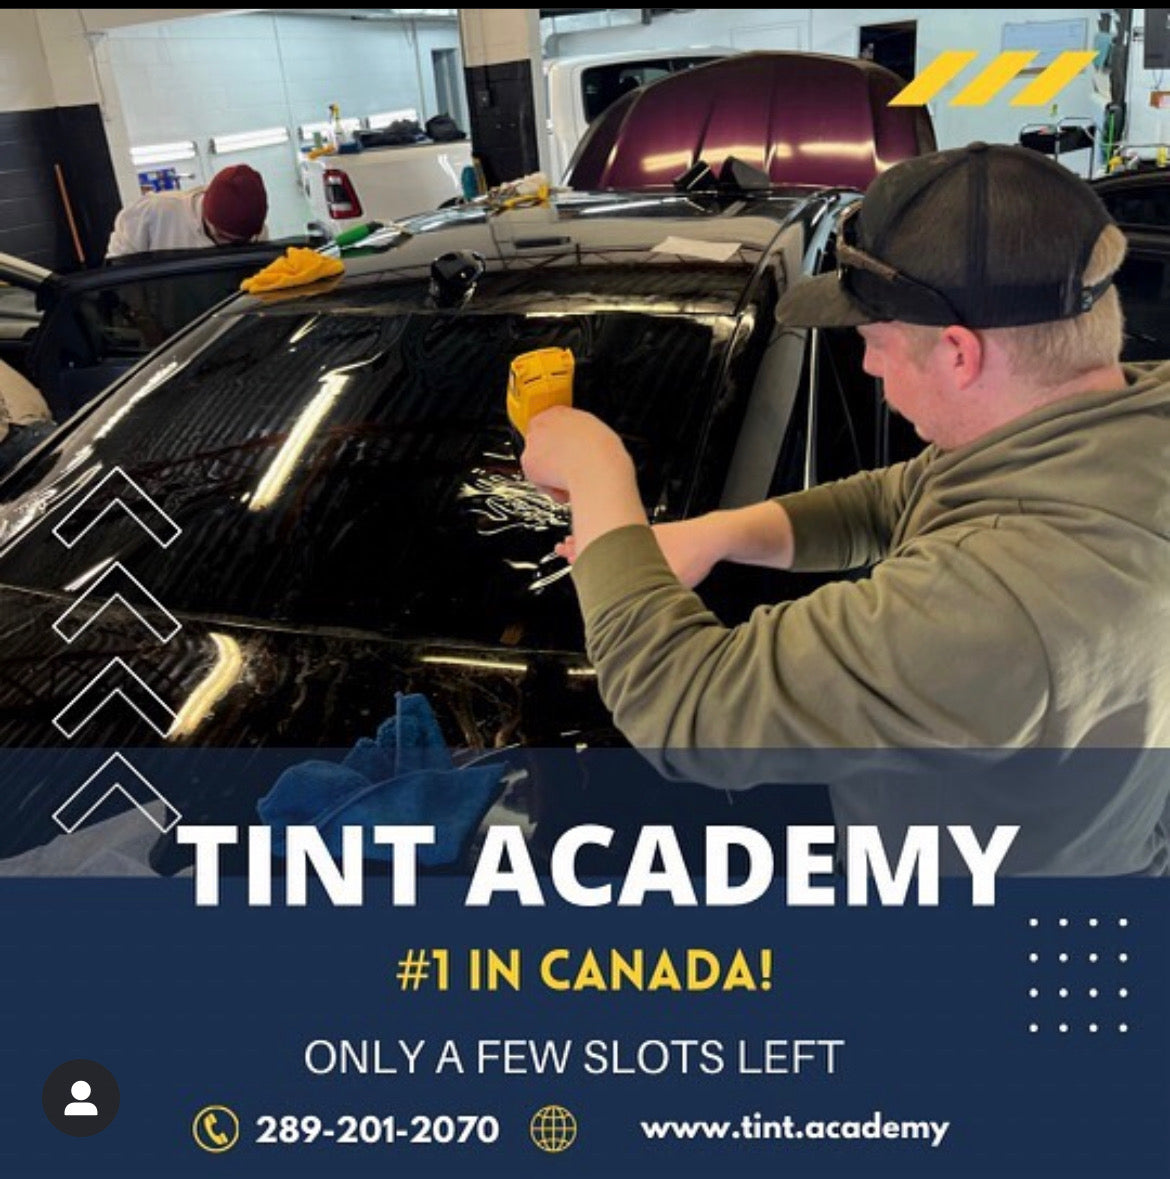 Can you really learn how to tint in 2 days?